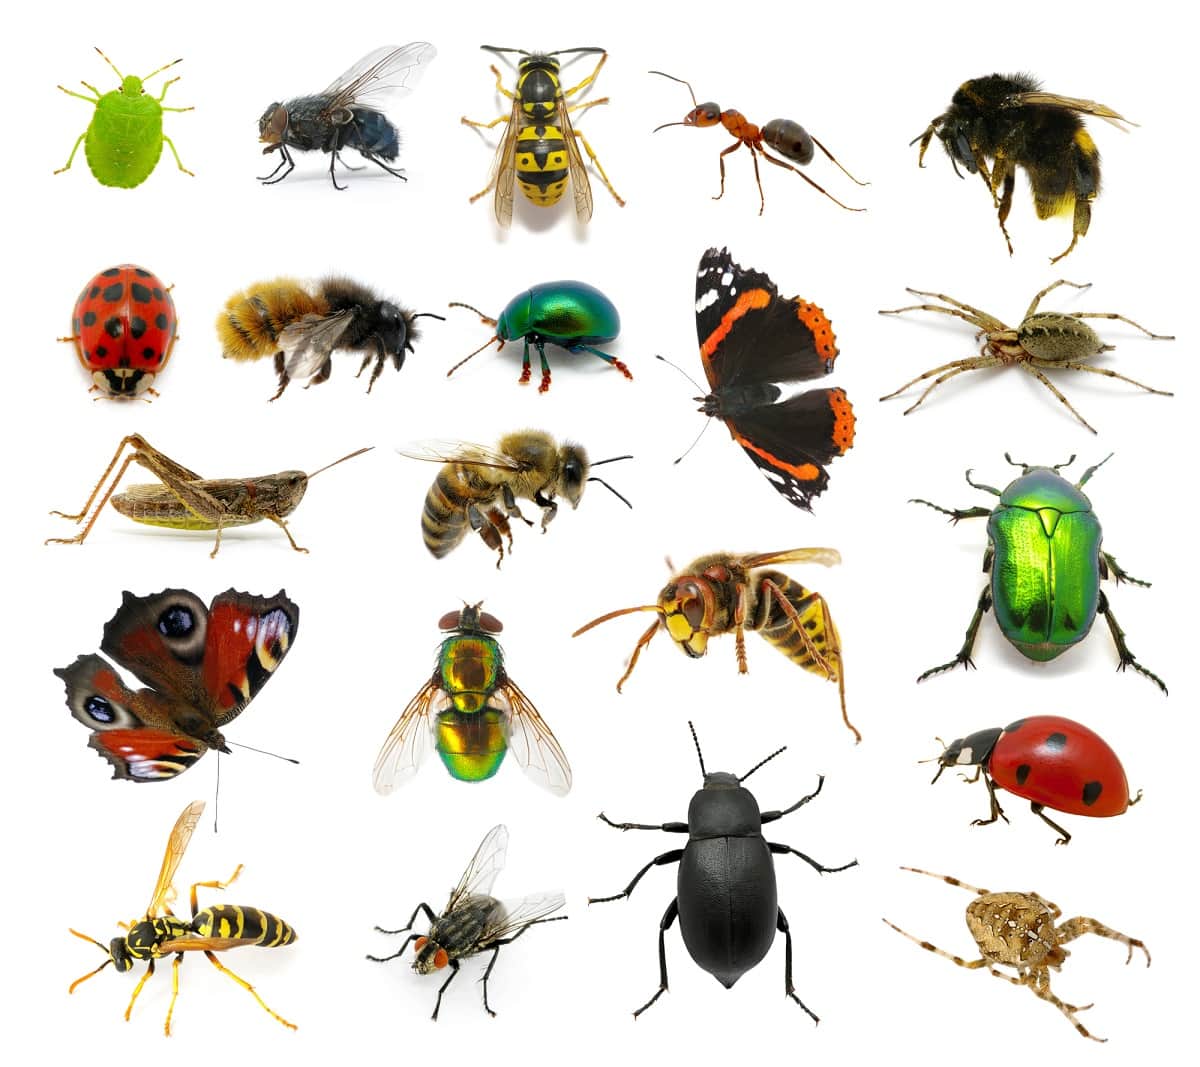 Springtime pests including beetles, wasps, and more.